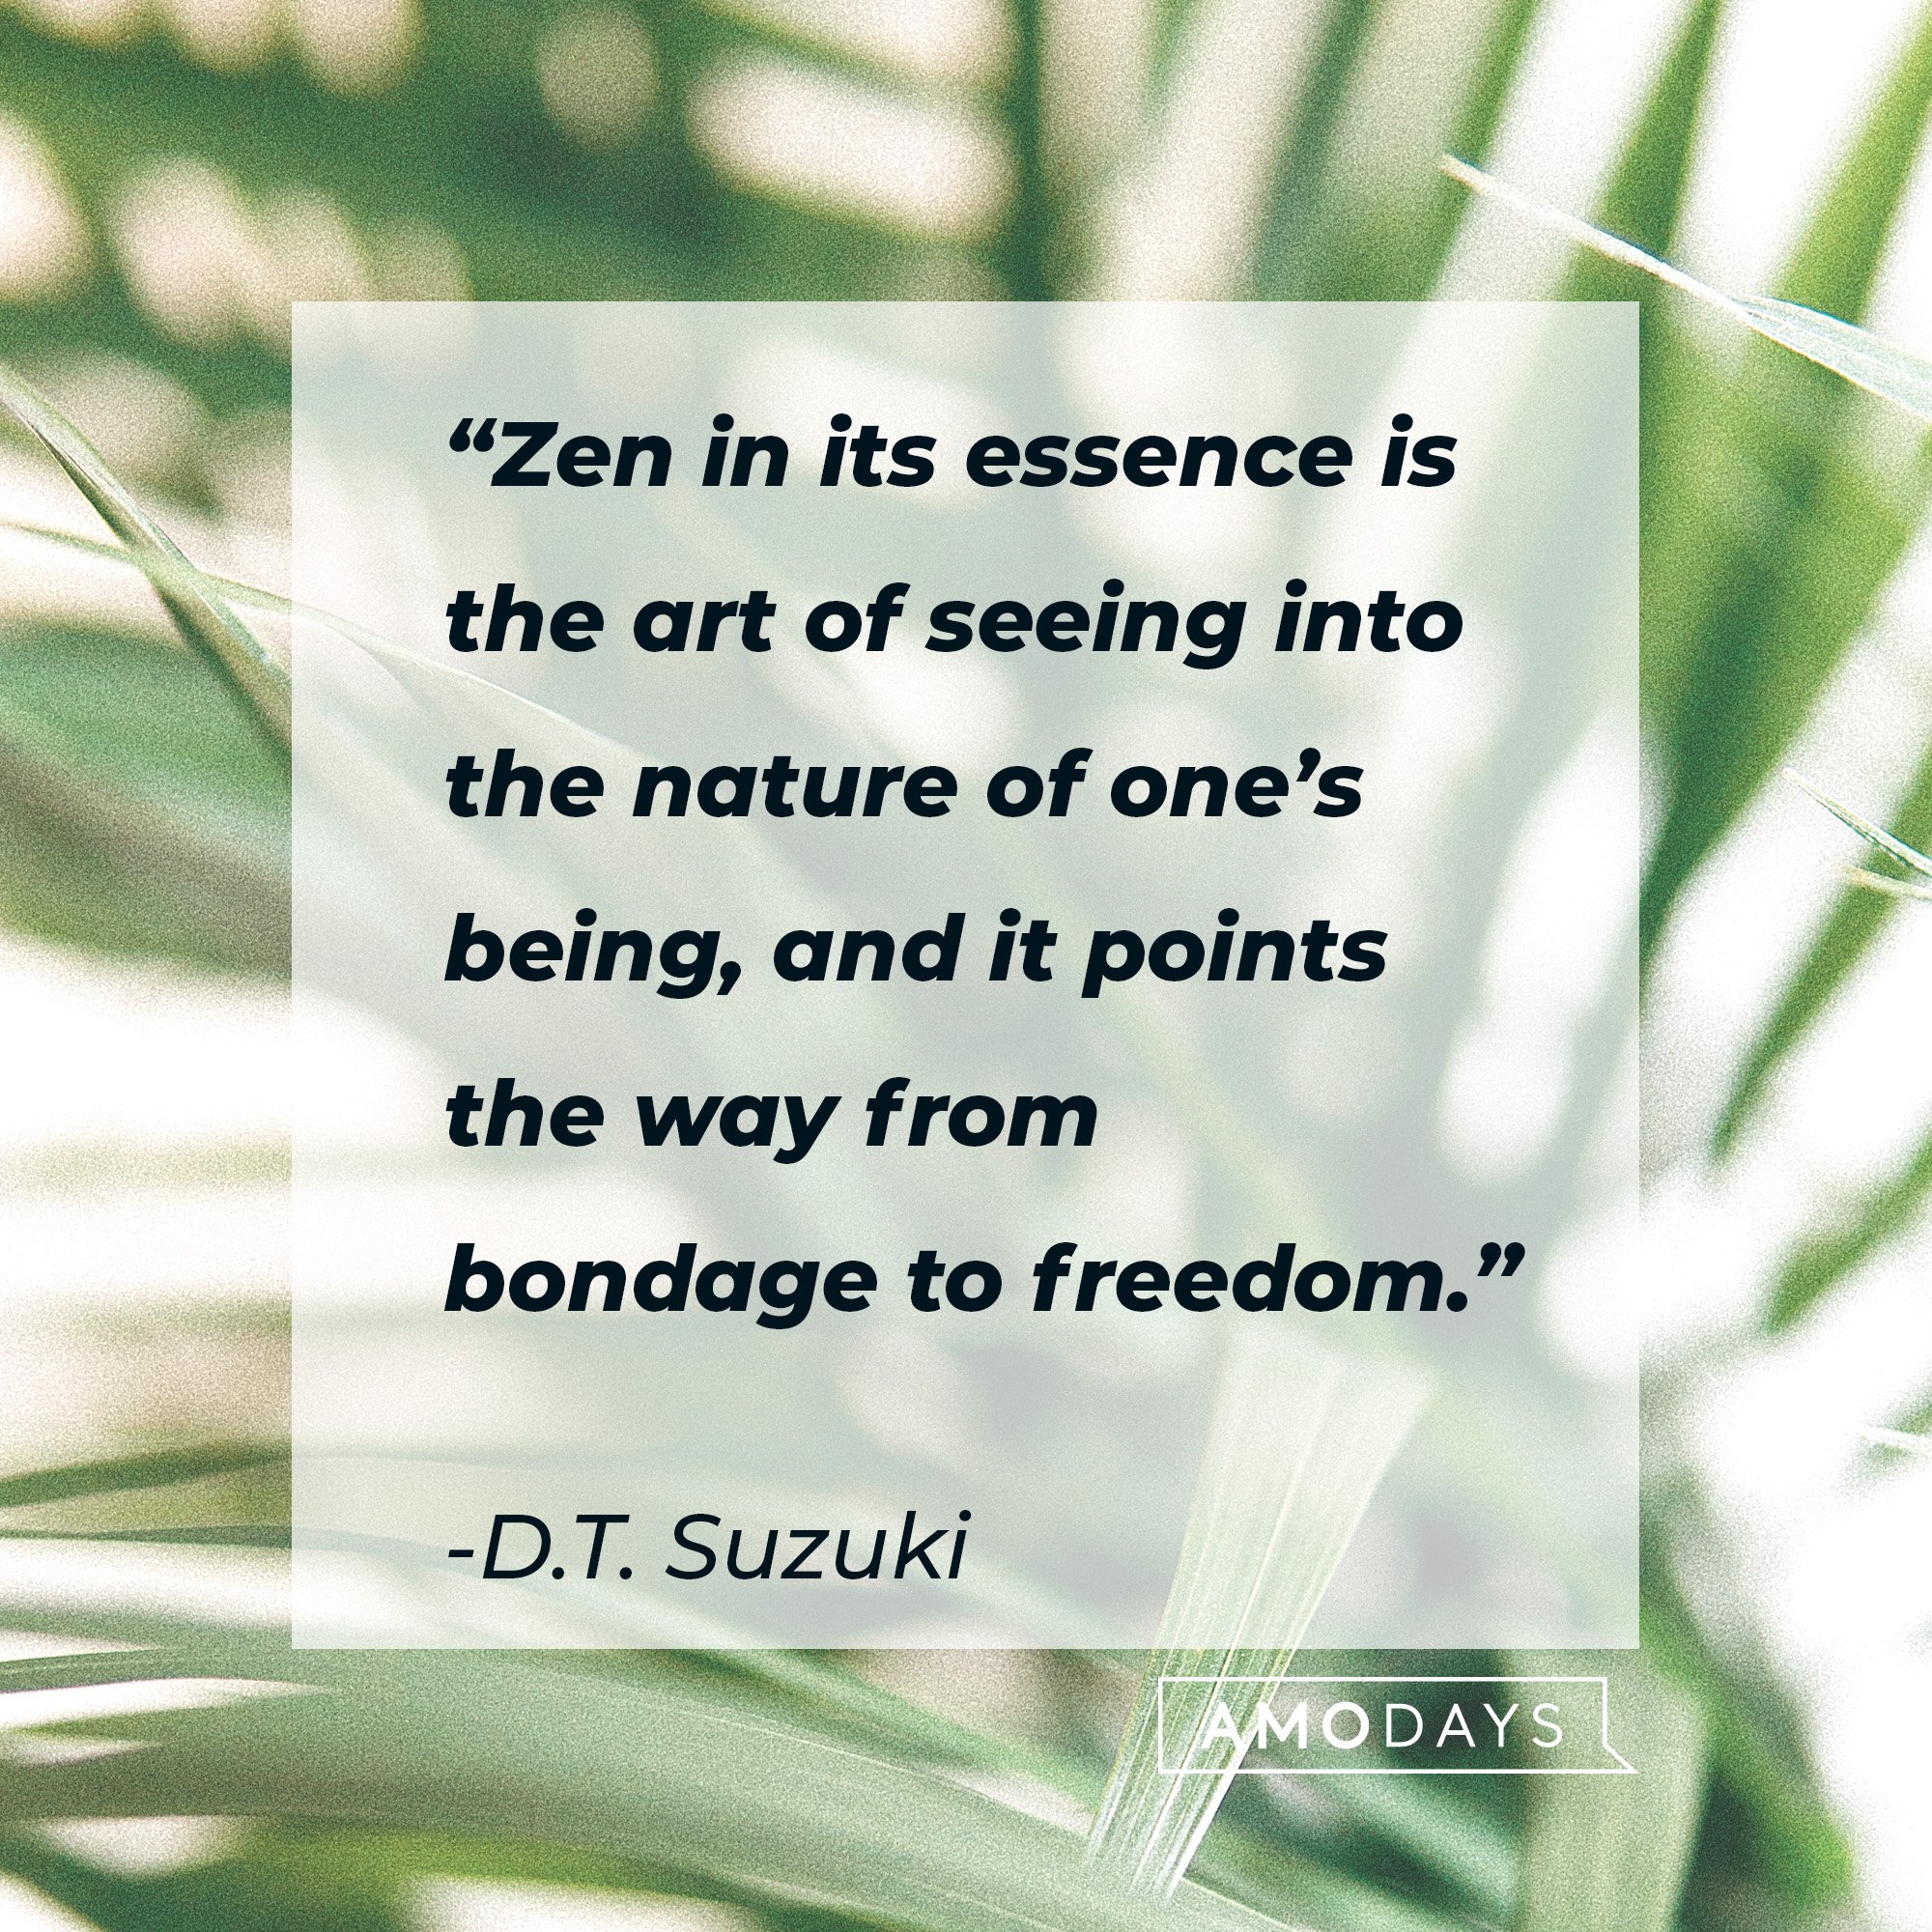 D.T. Suzuki's quote: “Zen in its essence is the art of seeing into the nature of one’s being, and it points the way from bondage to freedom.” | Image: AmoDays